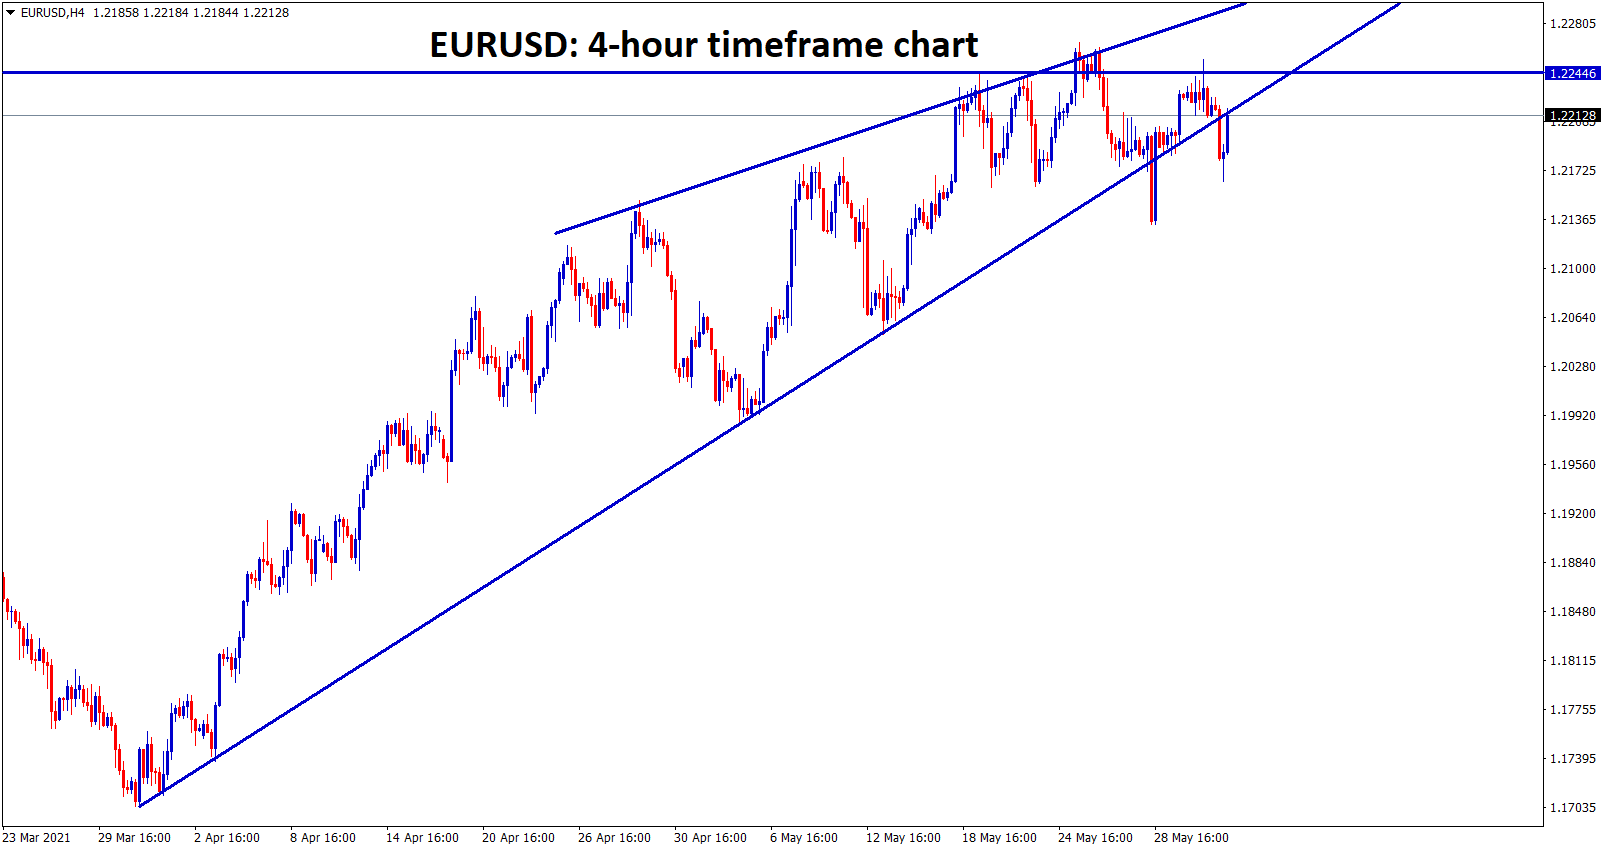 EURUSD is moving between the channel ranges wait for breakout from this channel